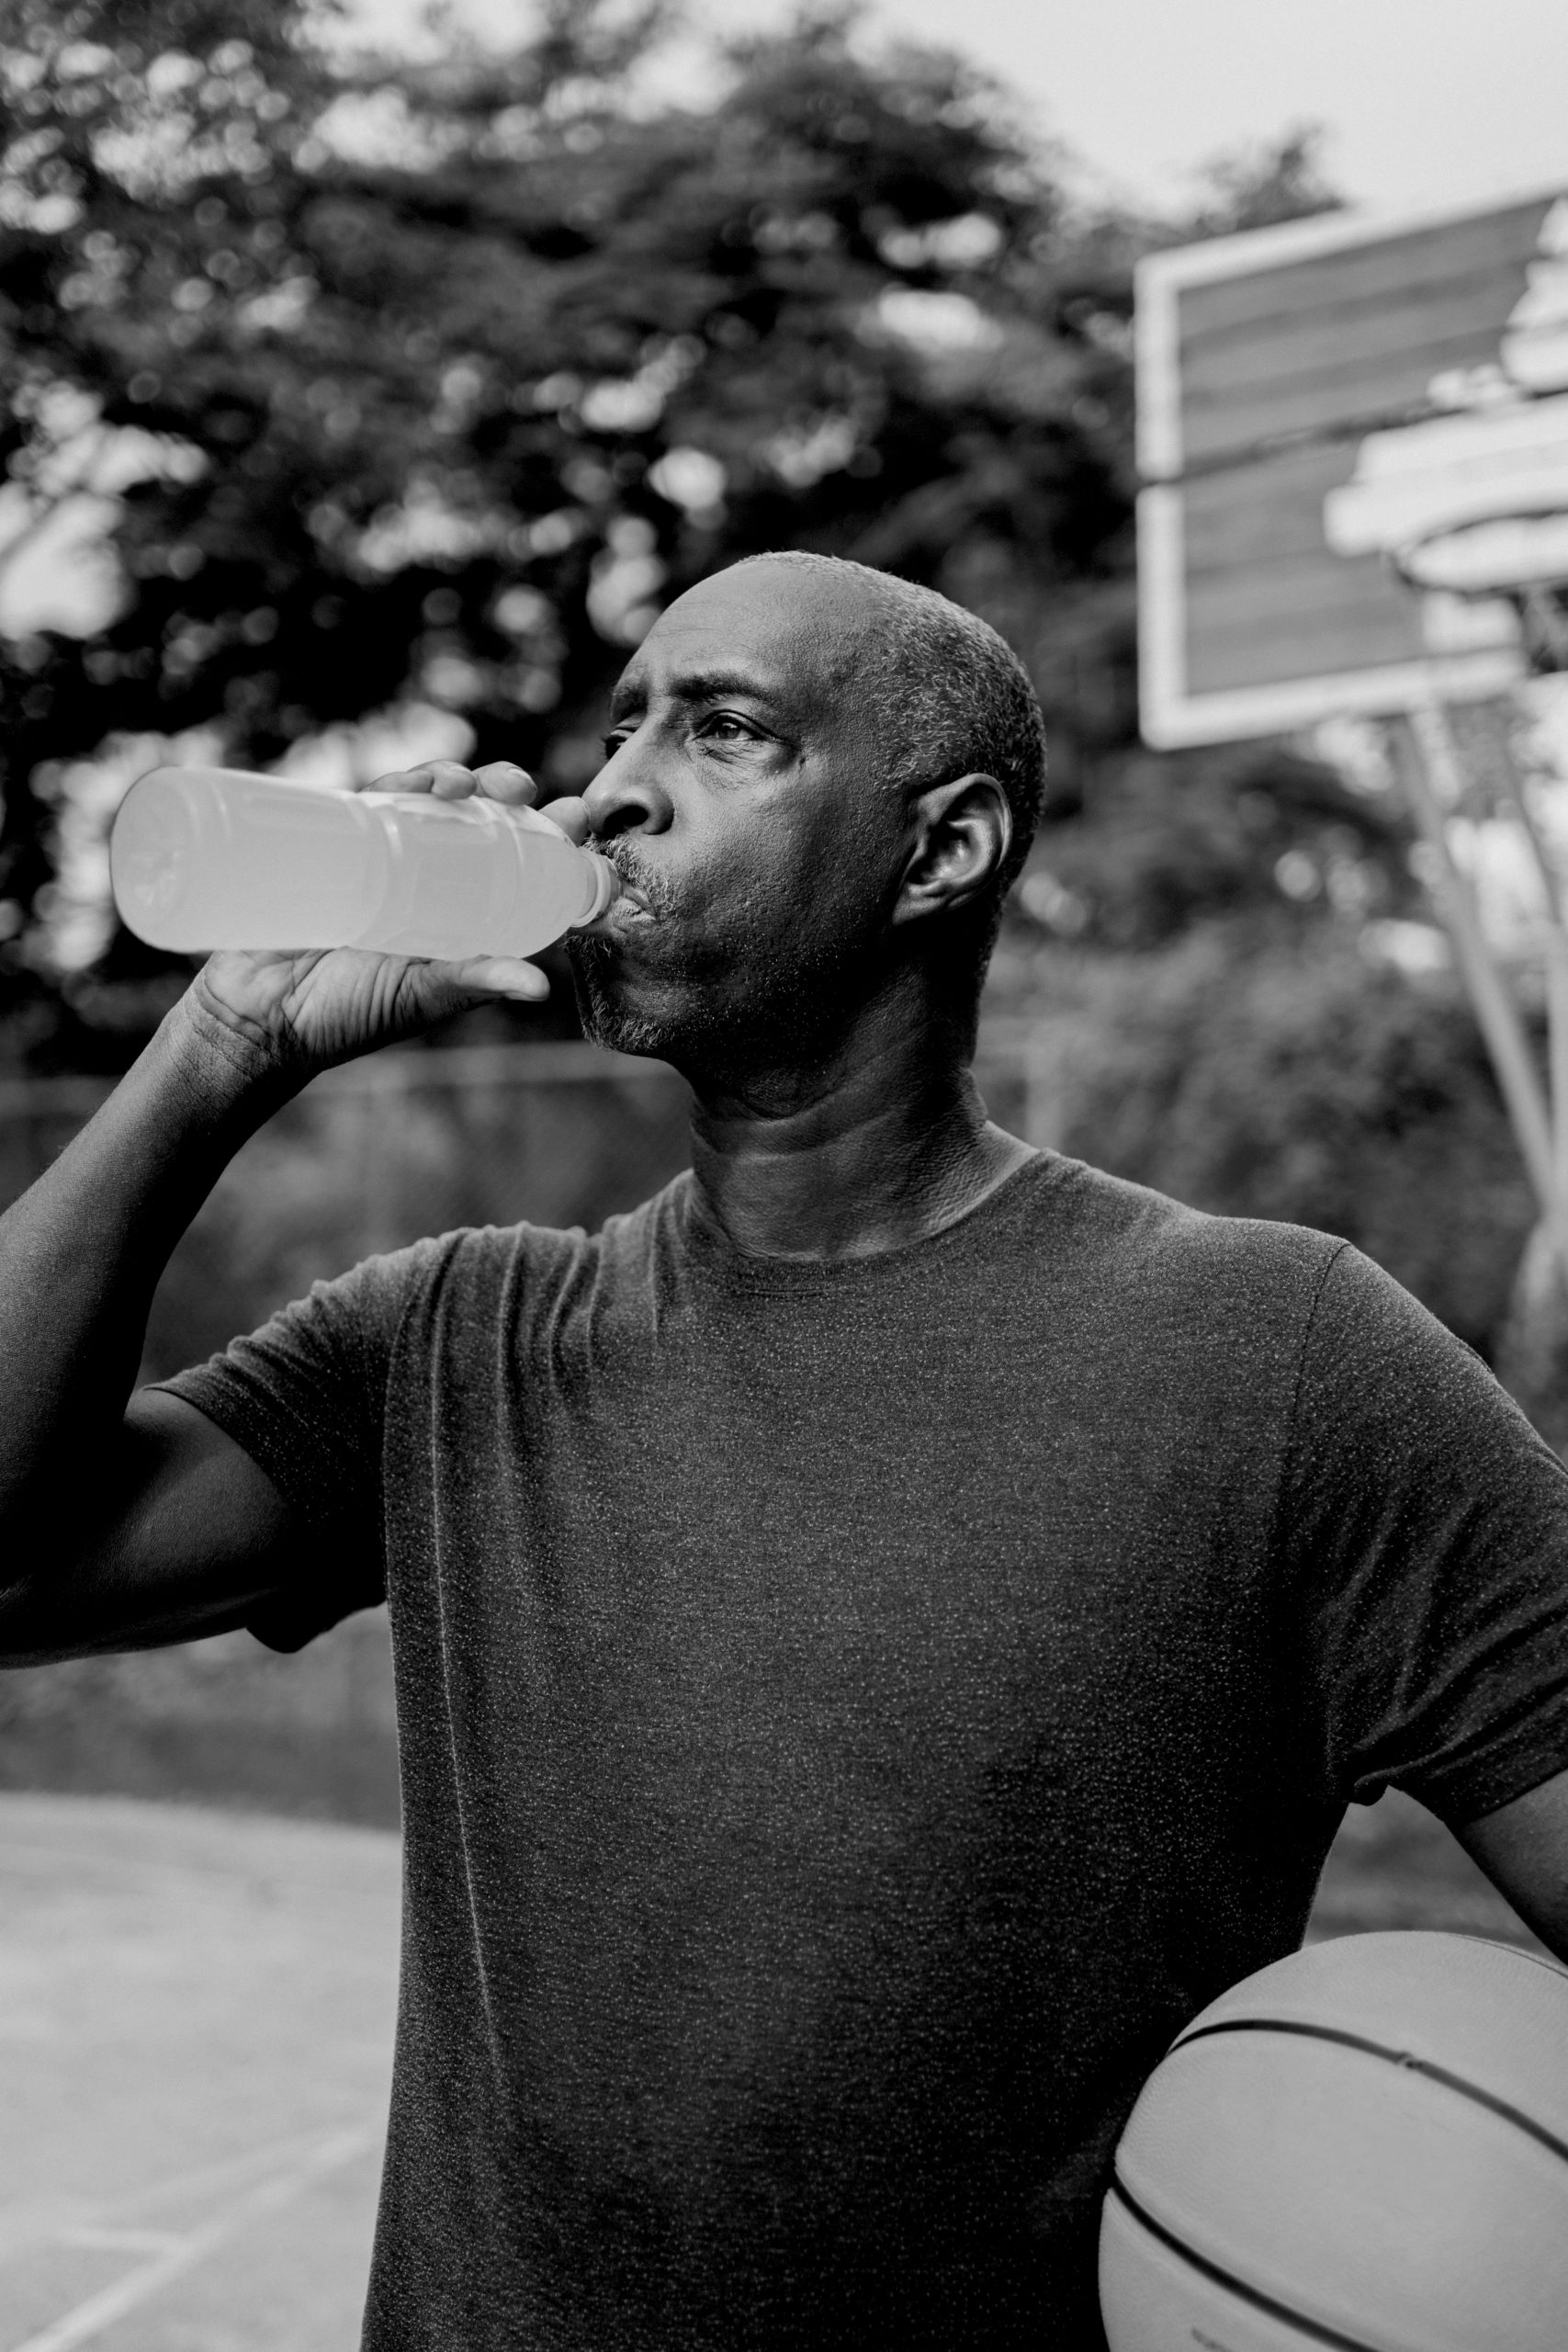 man holding basketball drinking out of bottle which is how to avoid heat stroke in the summer